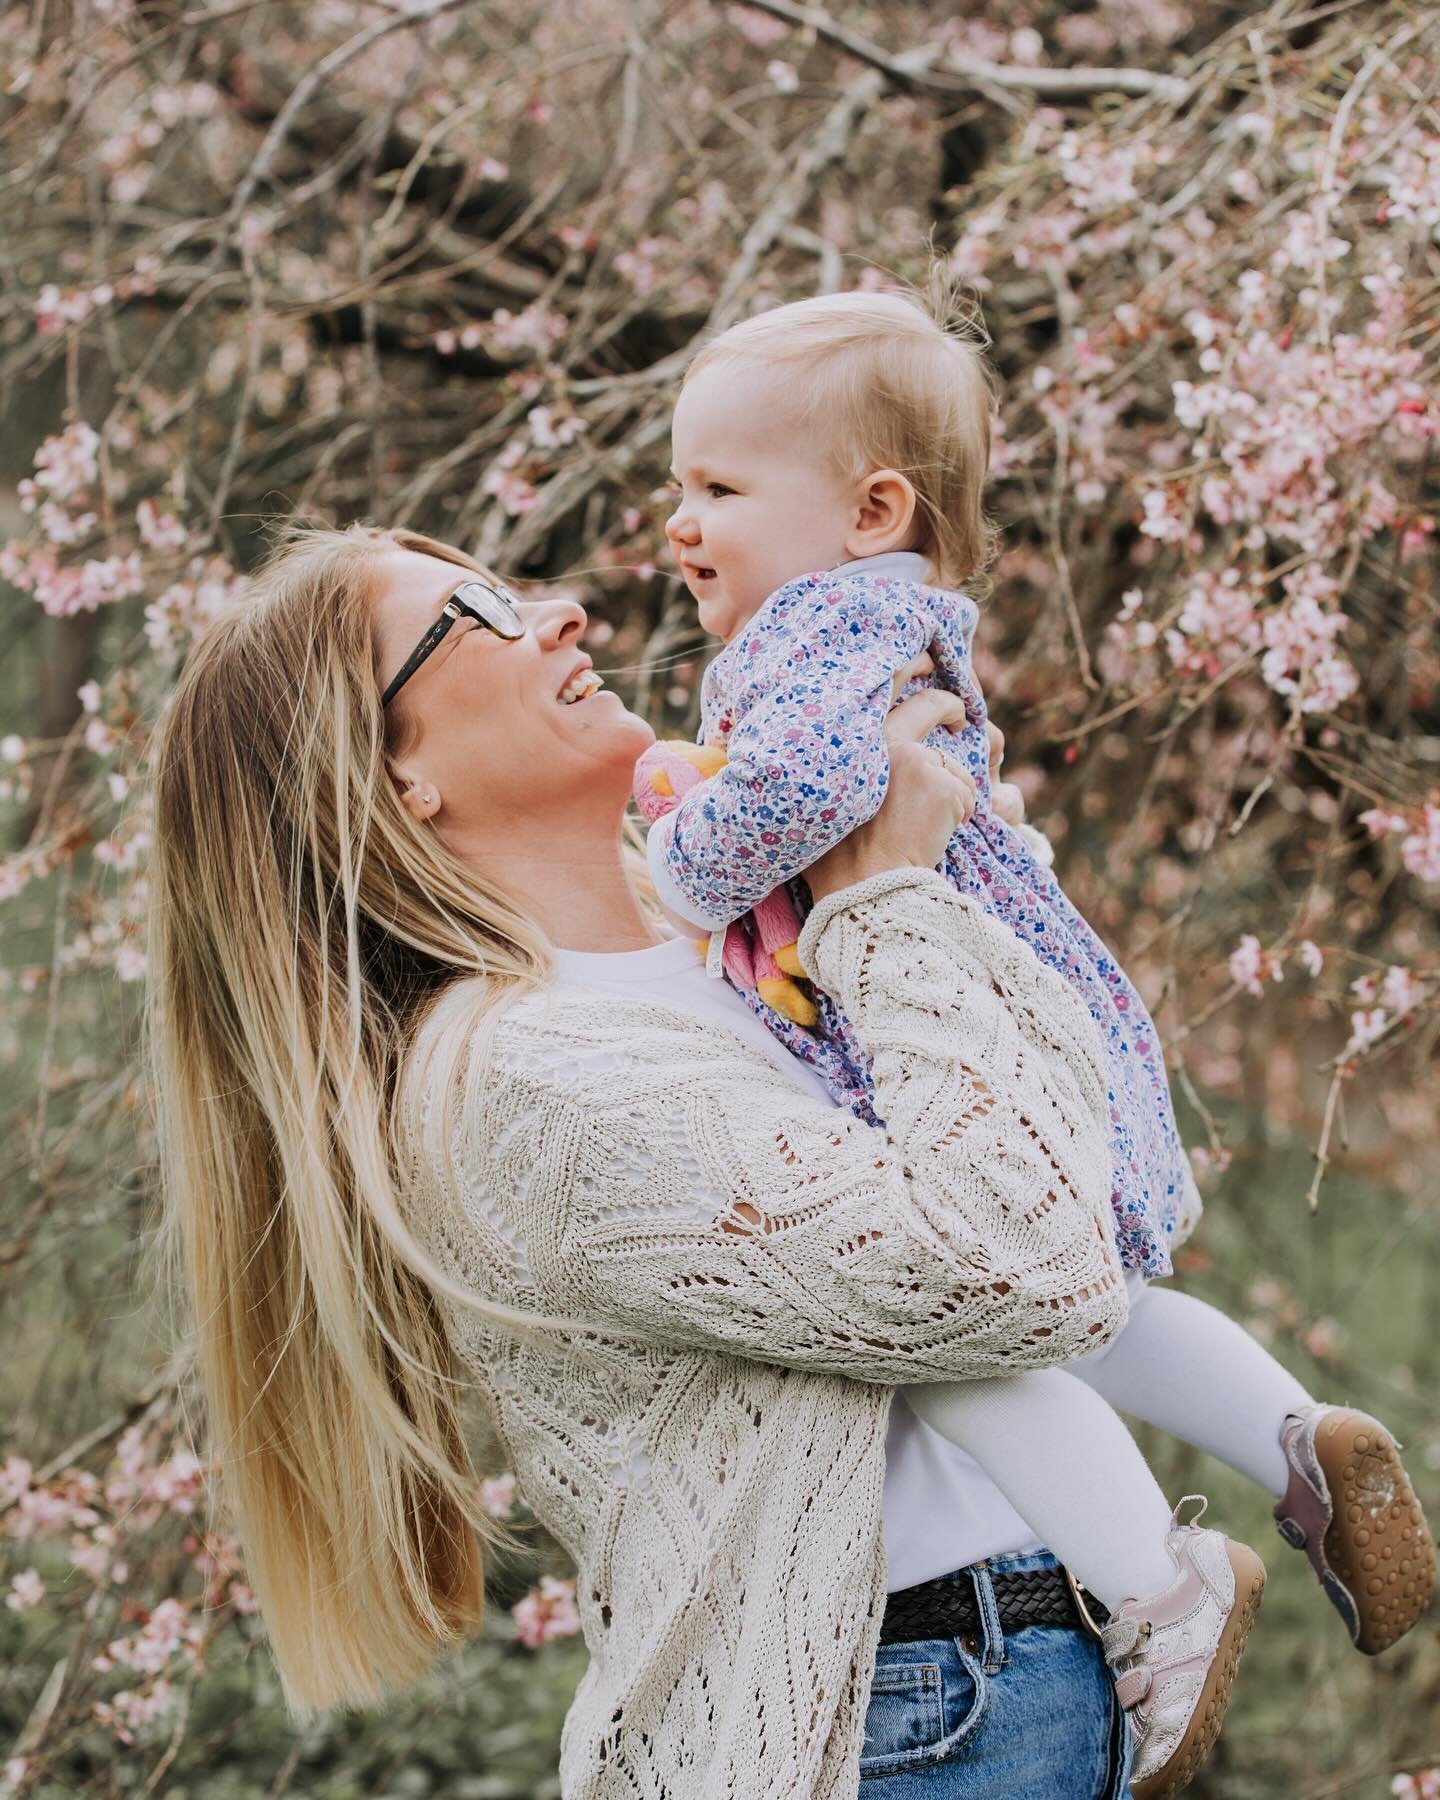 Loved this little family shoot with the blossom trees a few weeks back 🌸📸 

Baby had just started walking so this was a special way to document such a big milestone! 

@chrissierocho 

.
.
.
#blossomtree #blossomphotography #familyphotography #fami